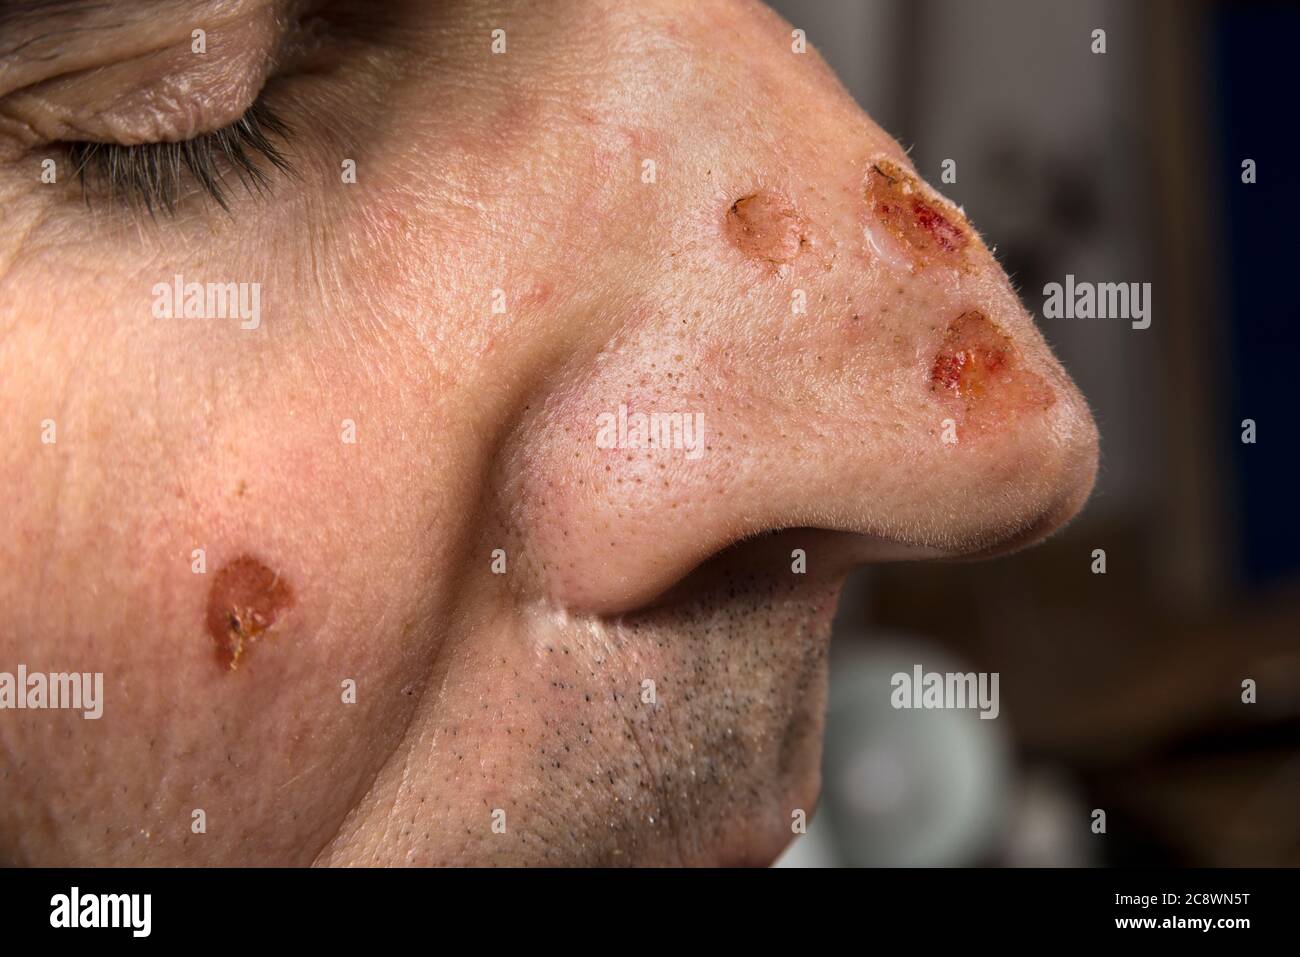 Wound from laser on a face from dermatologist Stock Photo - Alamy